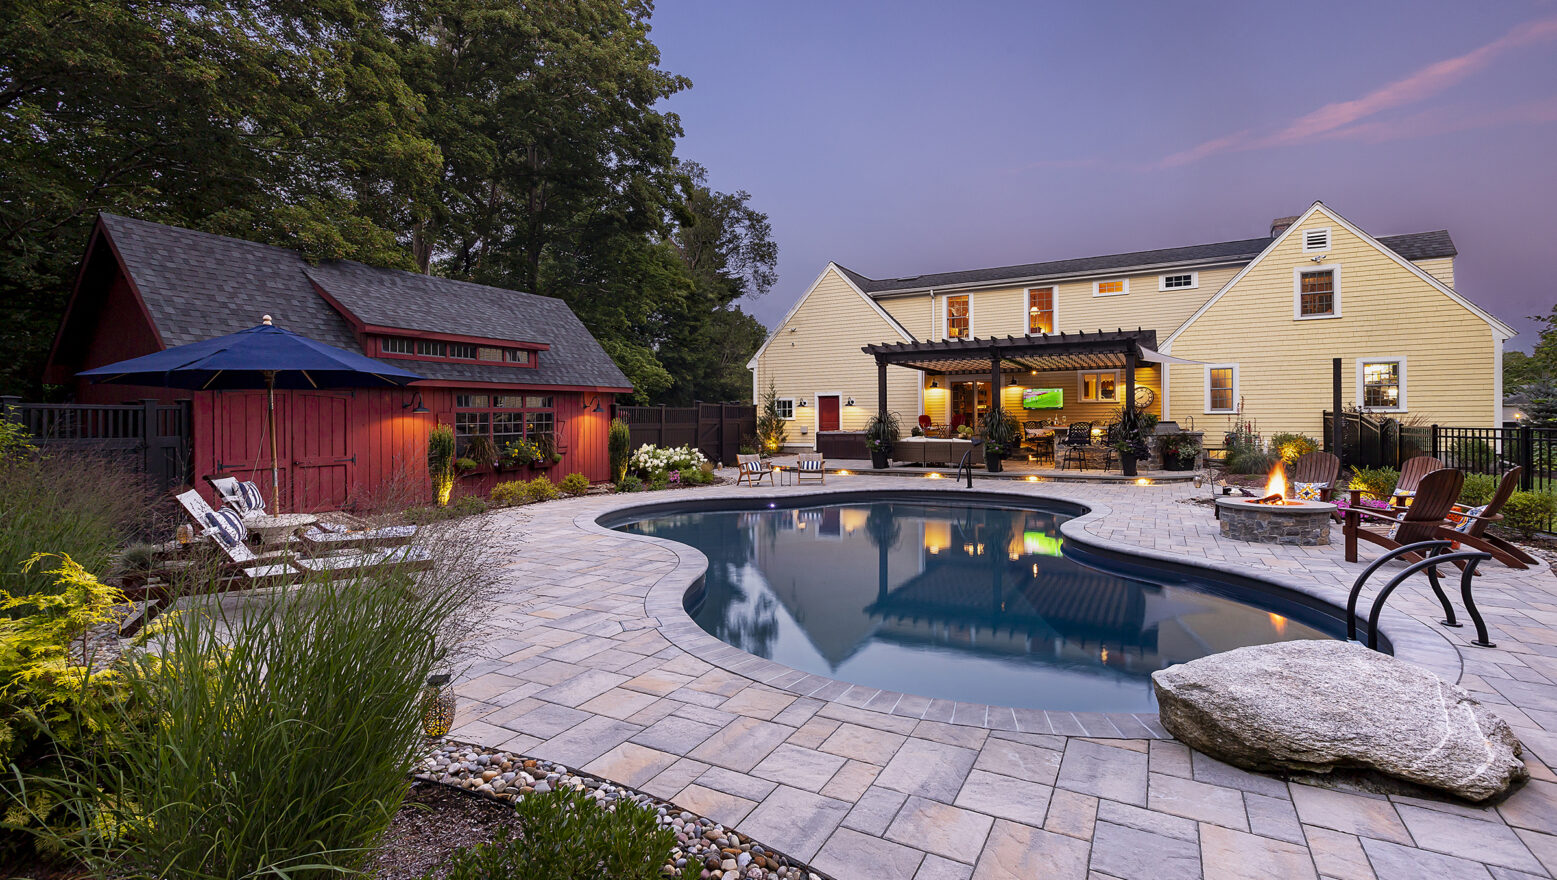 Paver Pool deck with Jump Rock and Fire Pit at Dex by Terra's Residential hardscape/landscape project in Stow, MA.